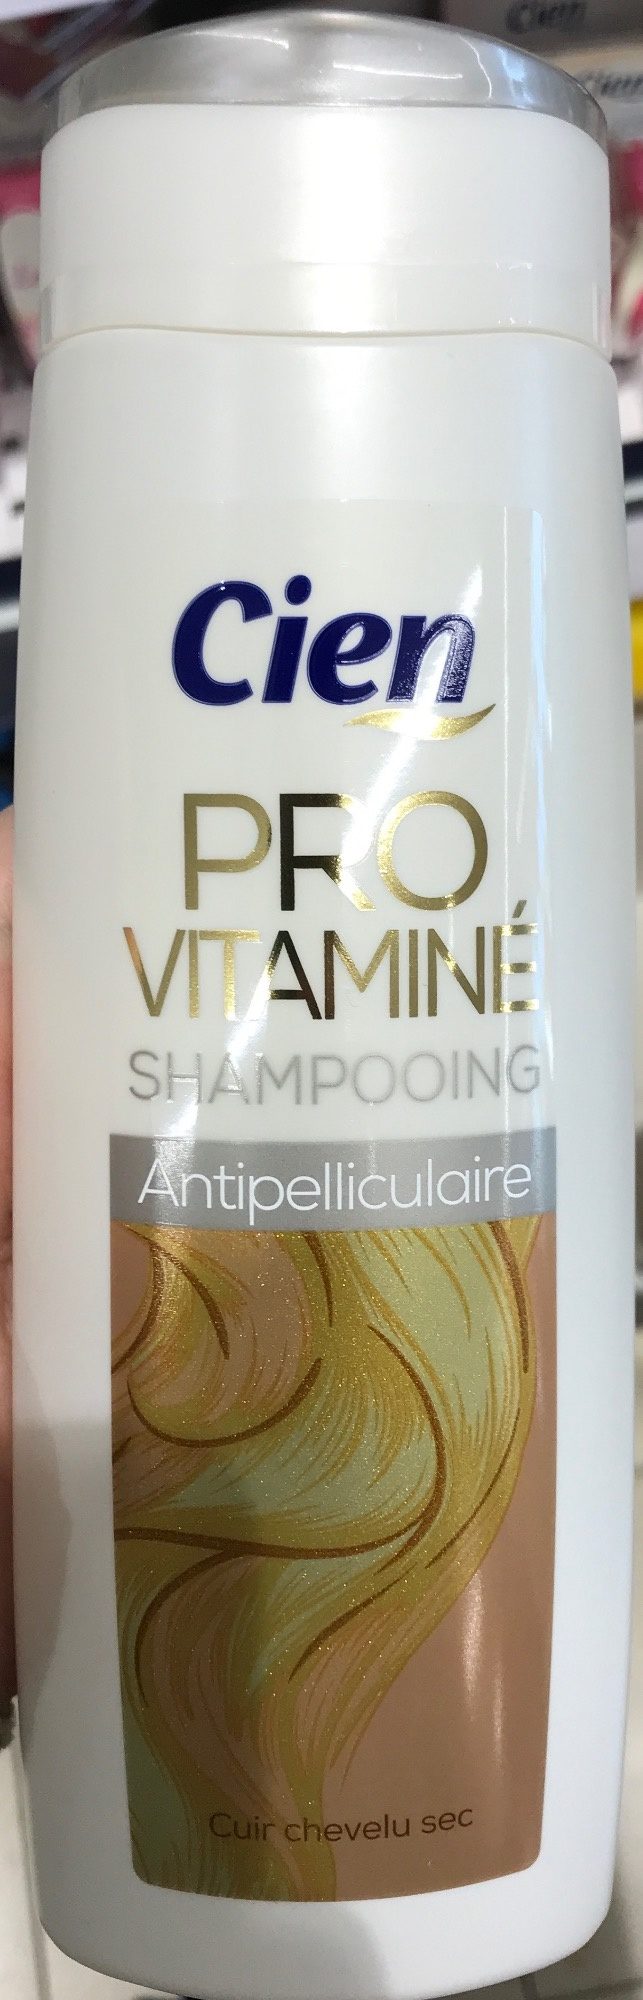 Provitaminé Shampooing Antipelliculaire - 製品 - fr